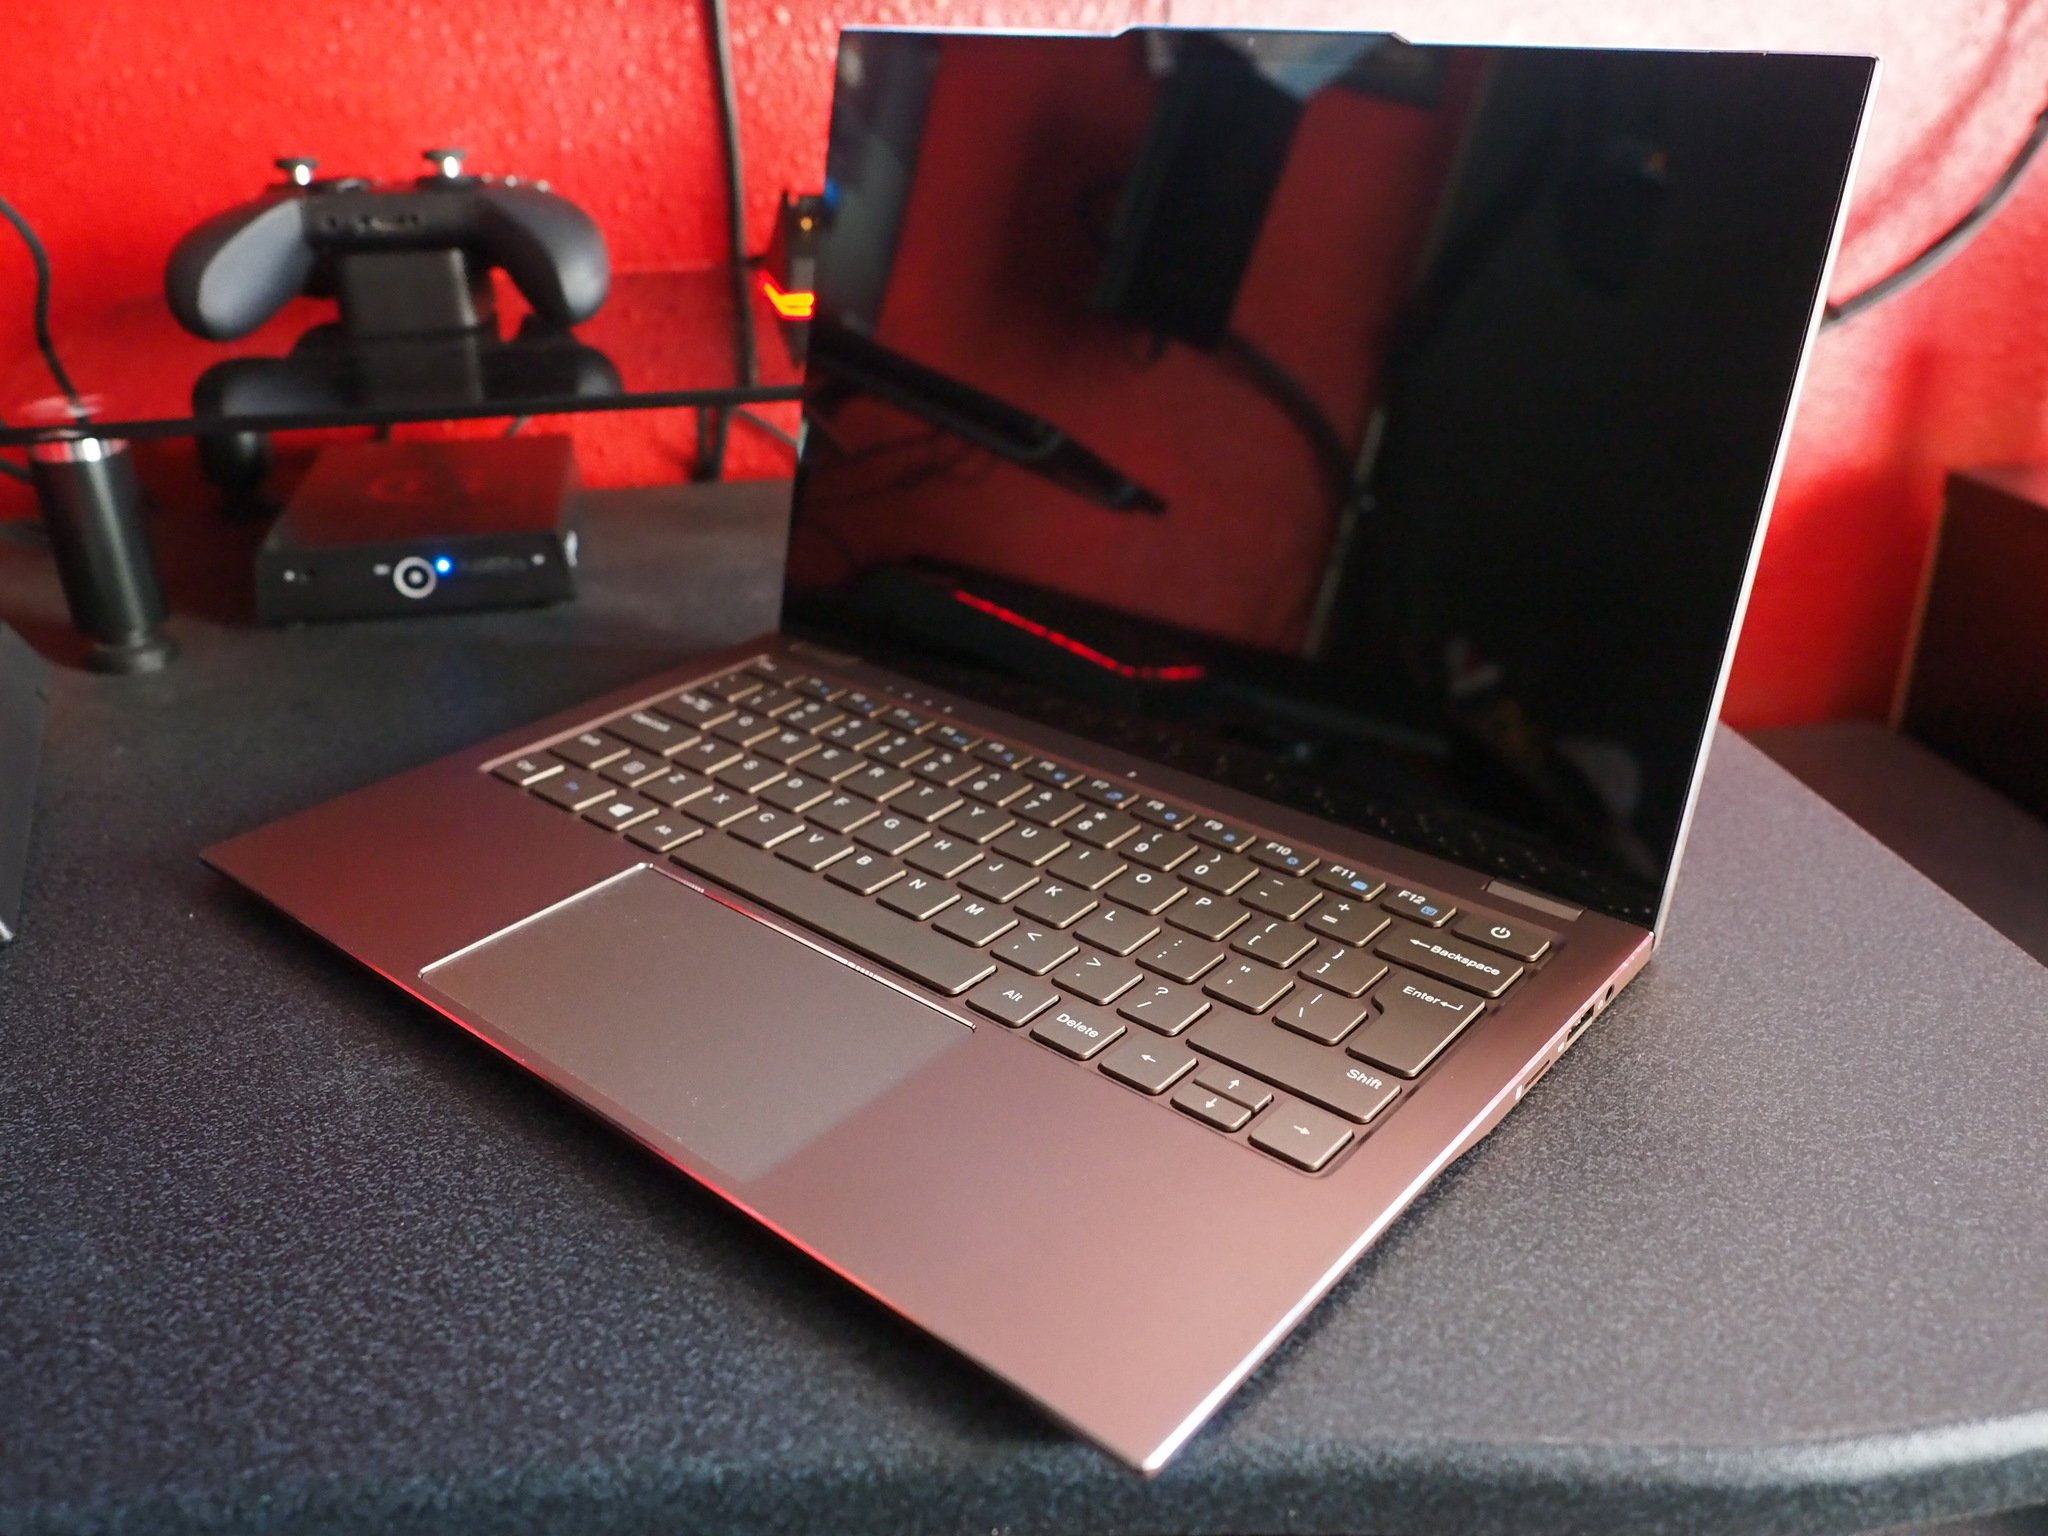 Jumper EZbook X3 Air laptop review: An affordable alternative with a